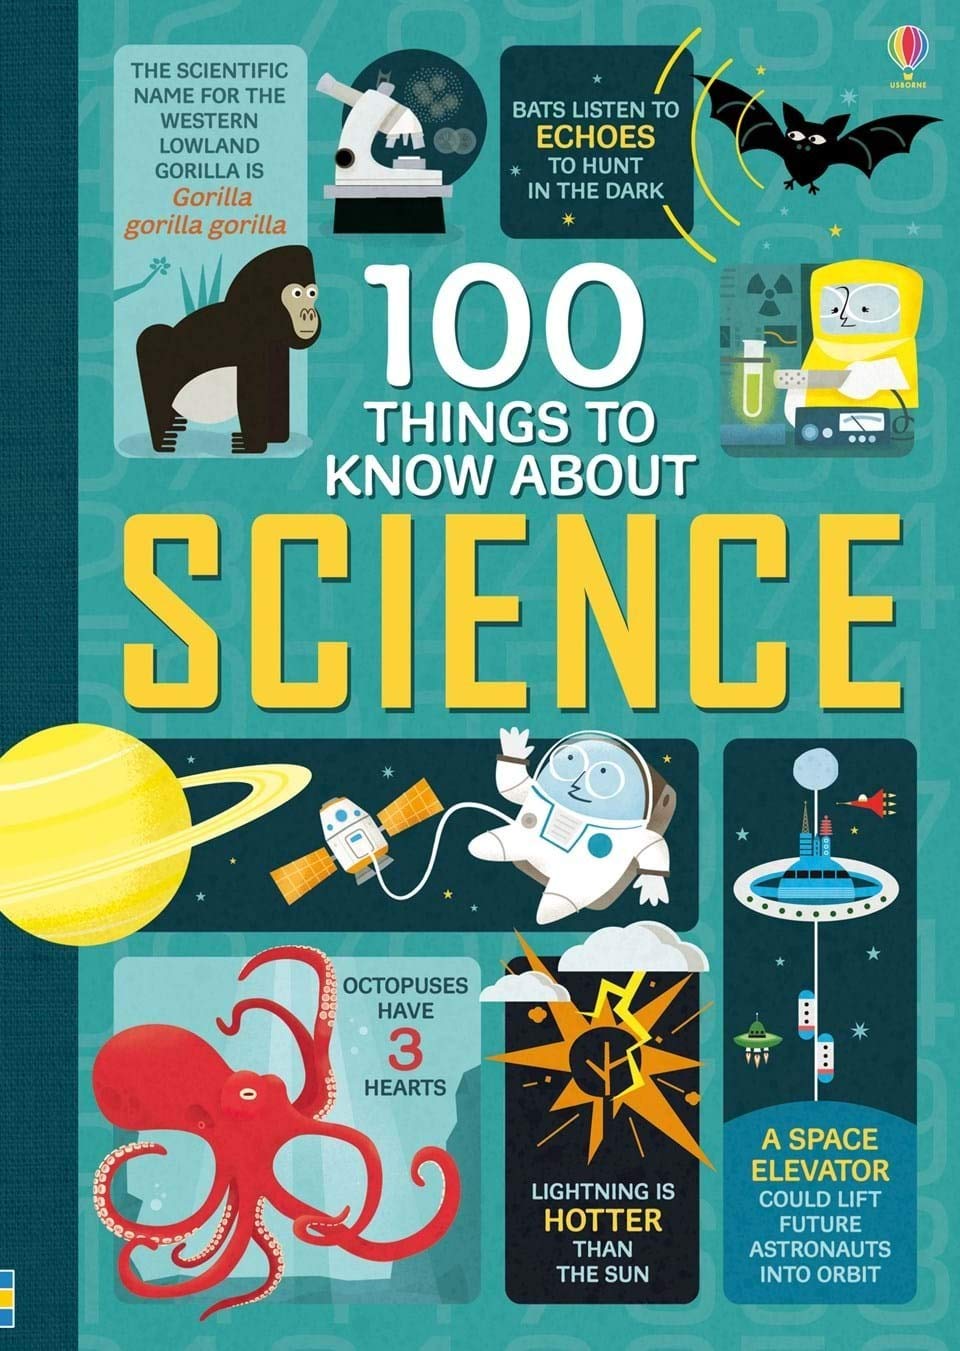 100 Things To Know About Science (Hardcover) esikidz marketplace children books preschool books 